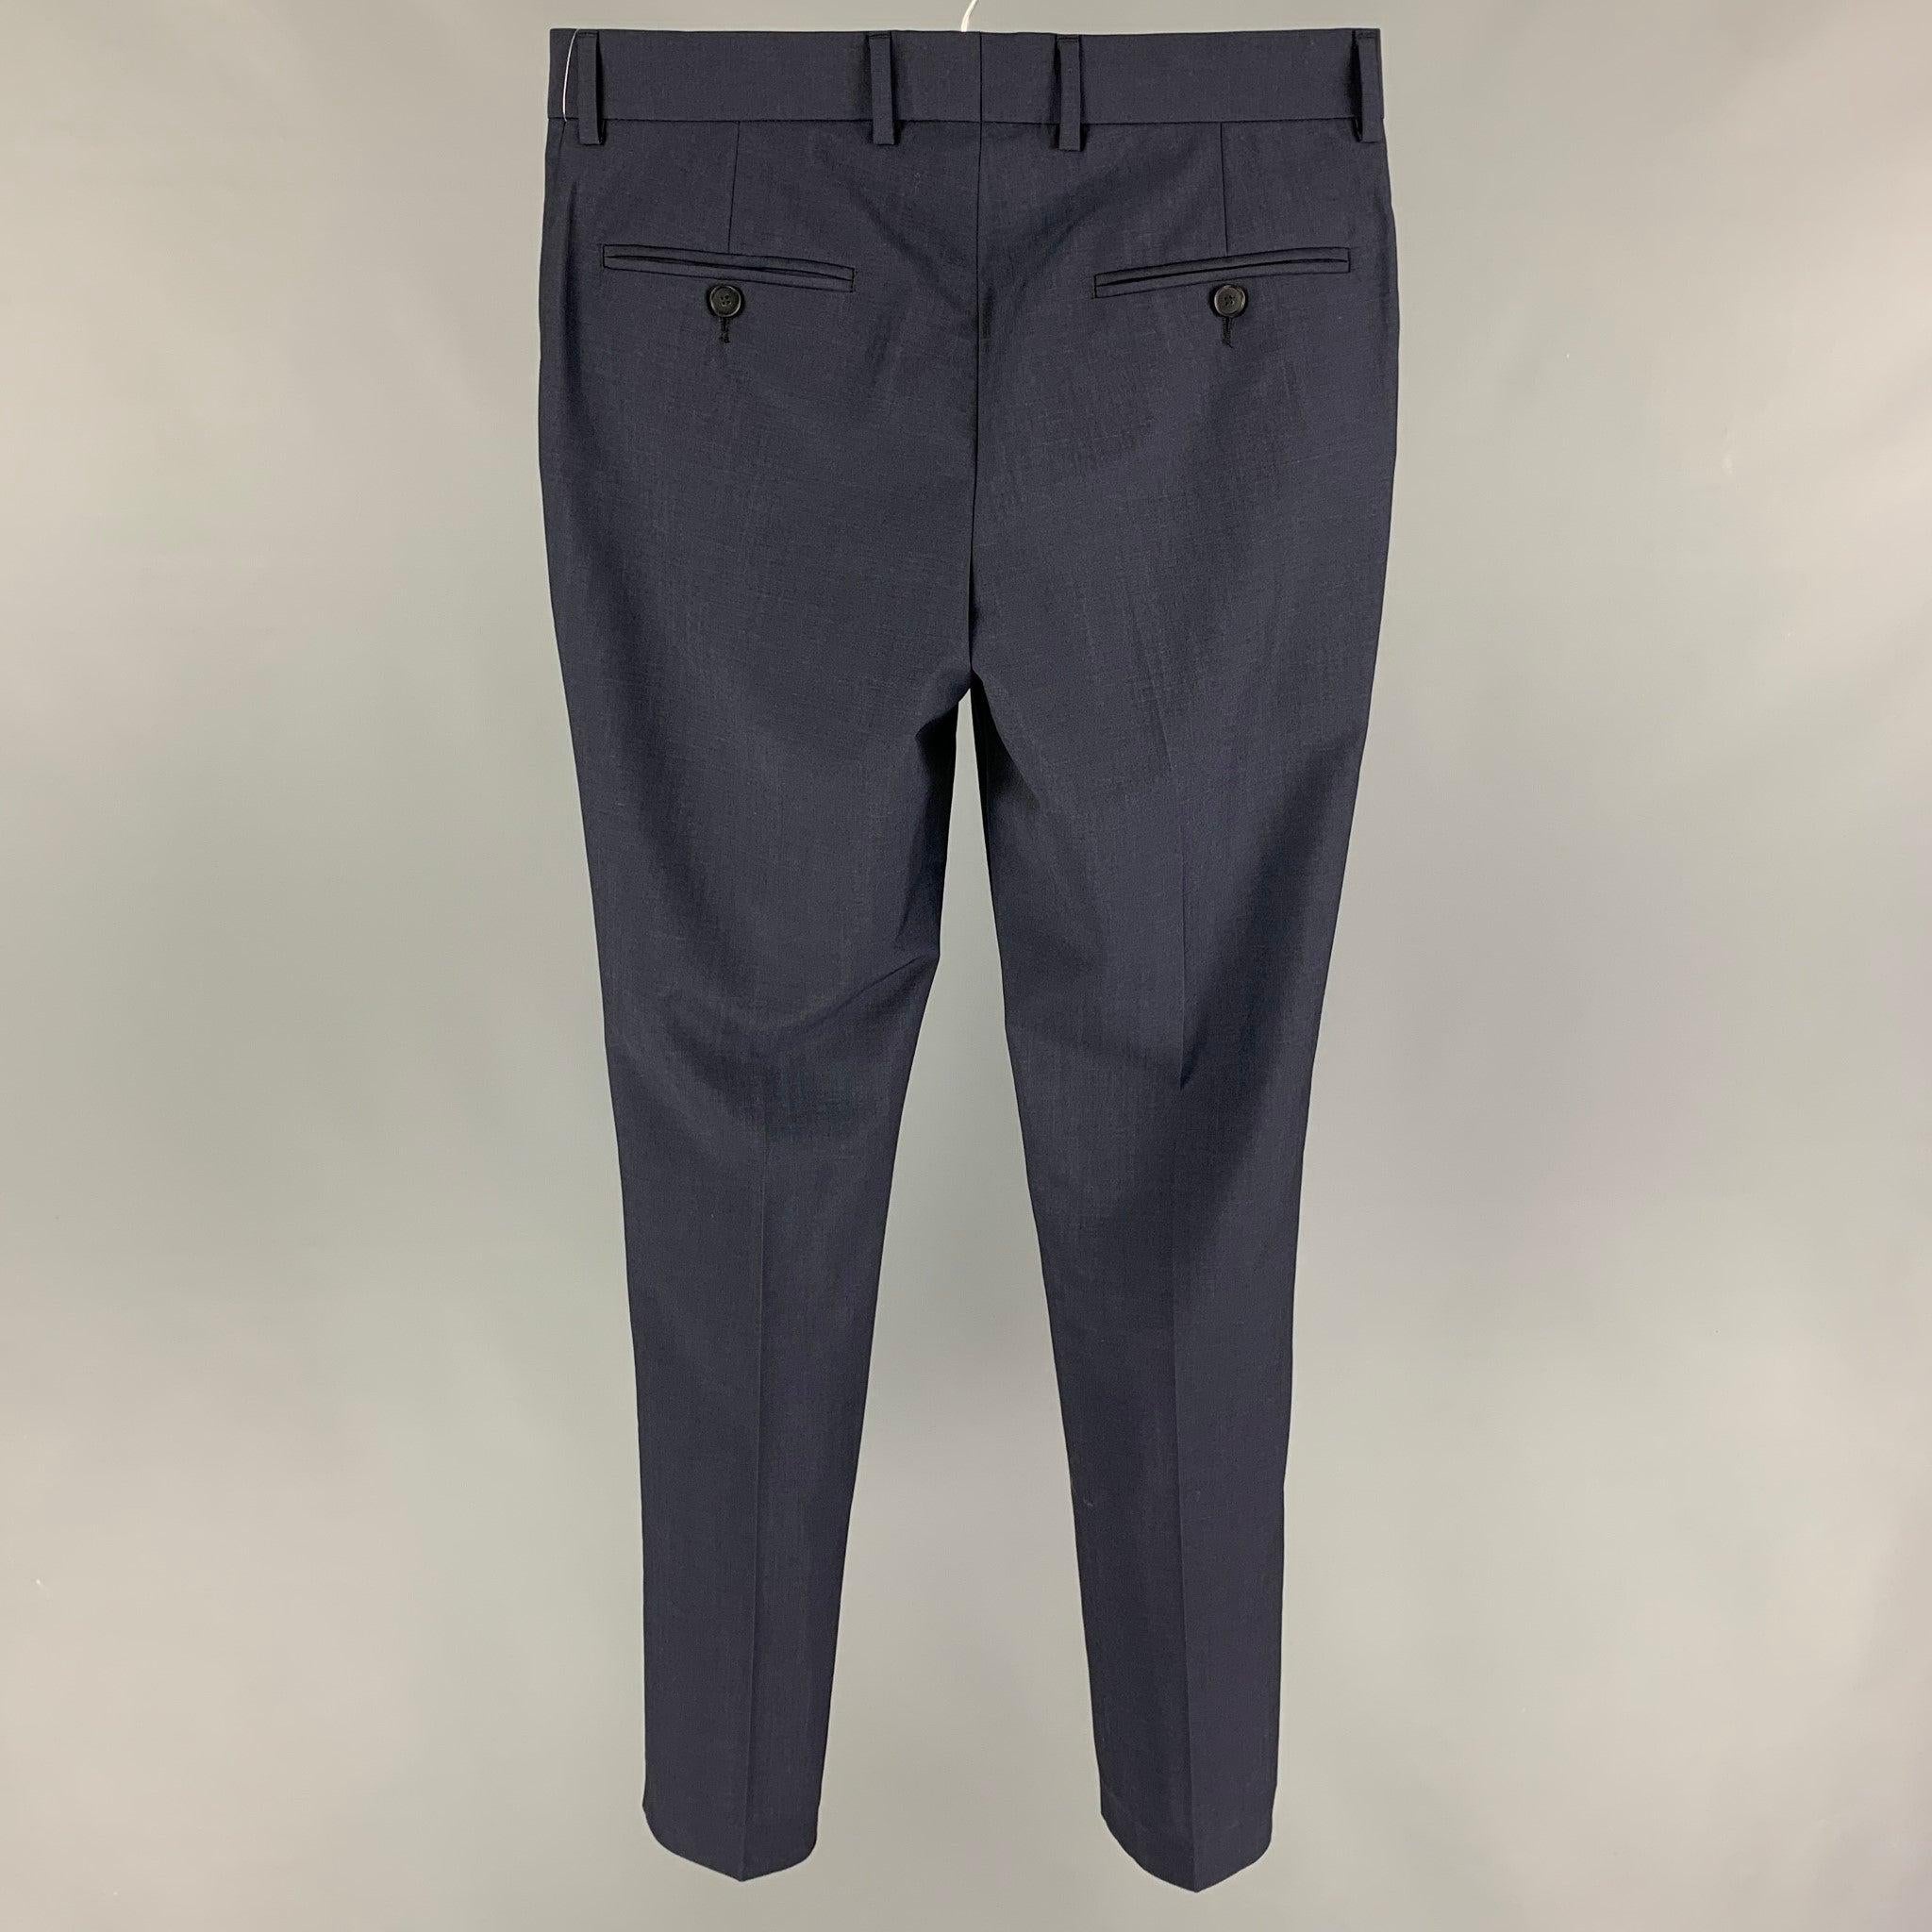 THE KOOPLES dress pants comes in a navy wool / mohair featuring a slim fit, front tab, and a zip fly closure.
Very Good
Pre-Owned Condition. 

Marked:   44 

Measurements: 
  Waist: 30 inches  Rise: 9 inches  Inseam: 32 inches 
  
  
 
Reference: